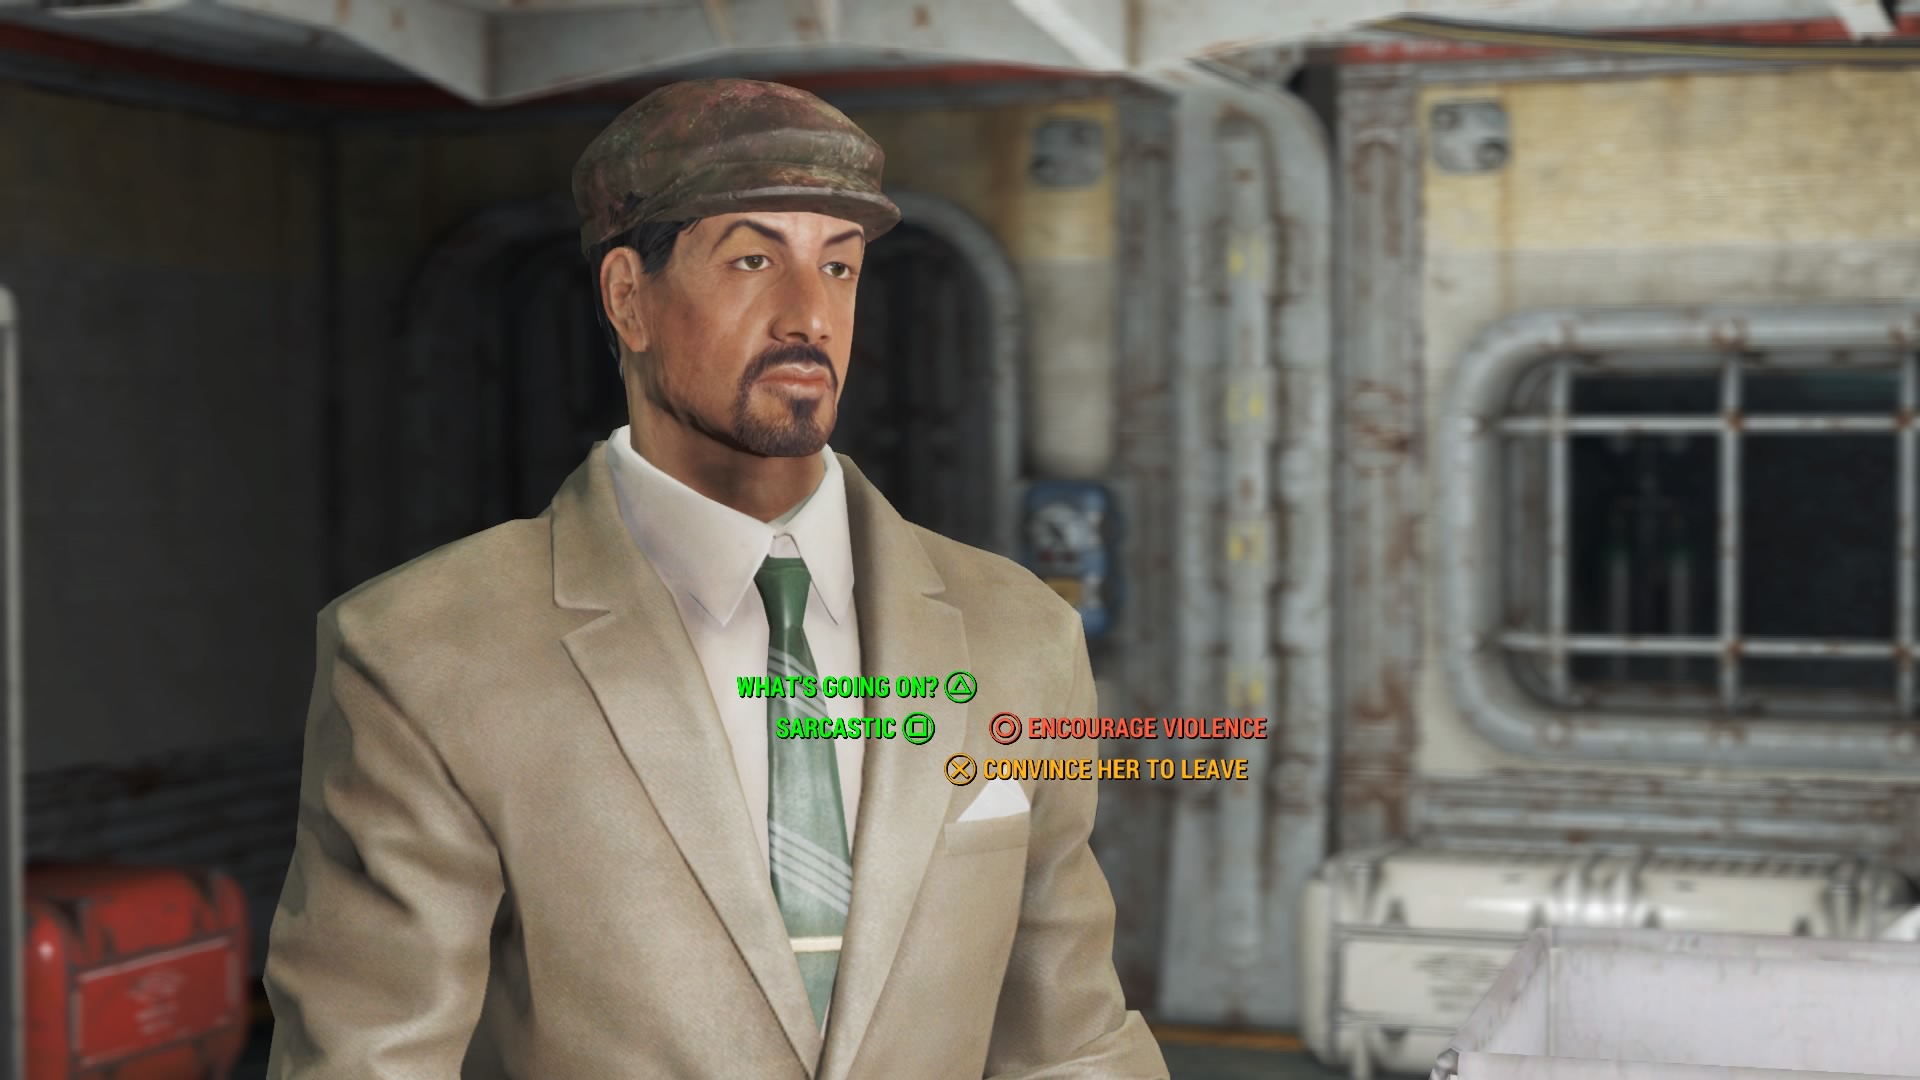 fallout 4 character creation celebrities - What'S Going On? Sarcastic @ Encourage Violence Convince Her To Leave